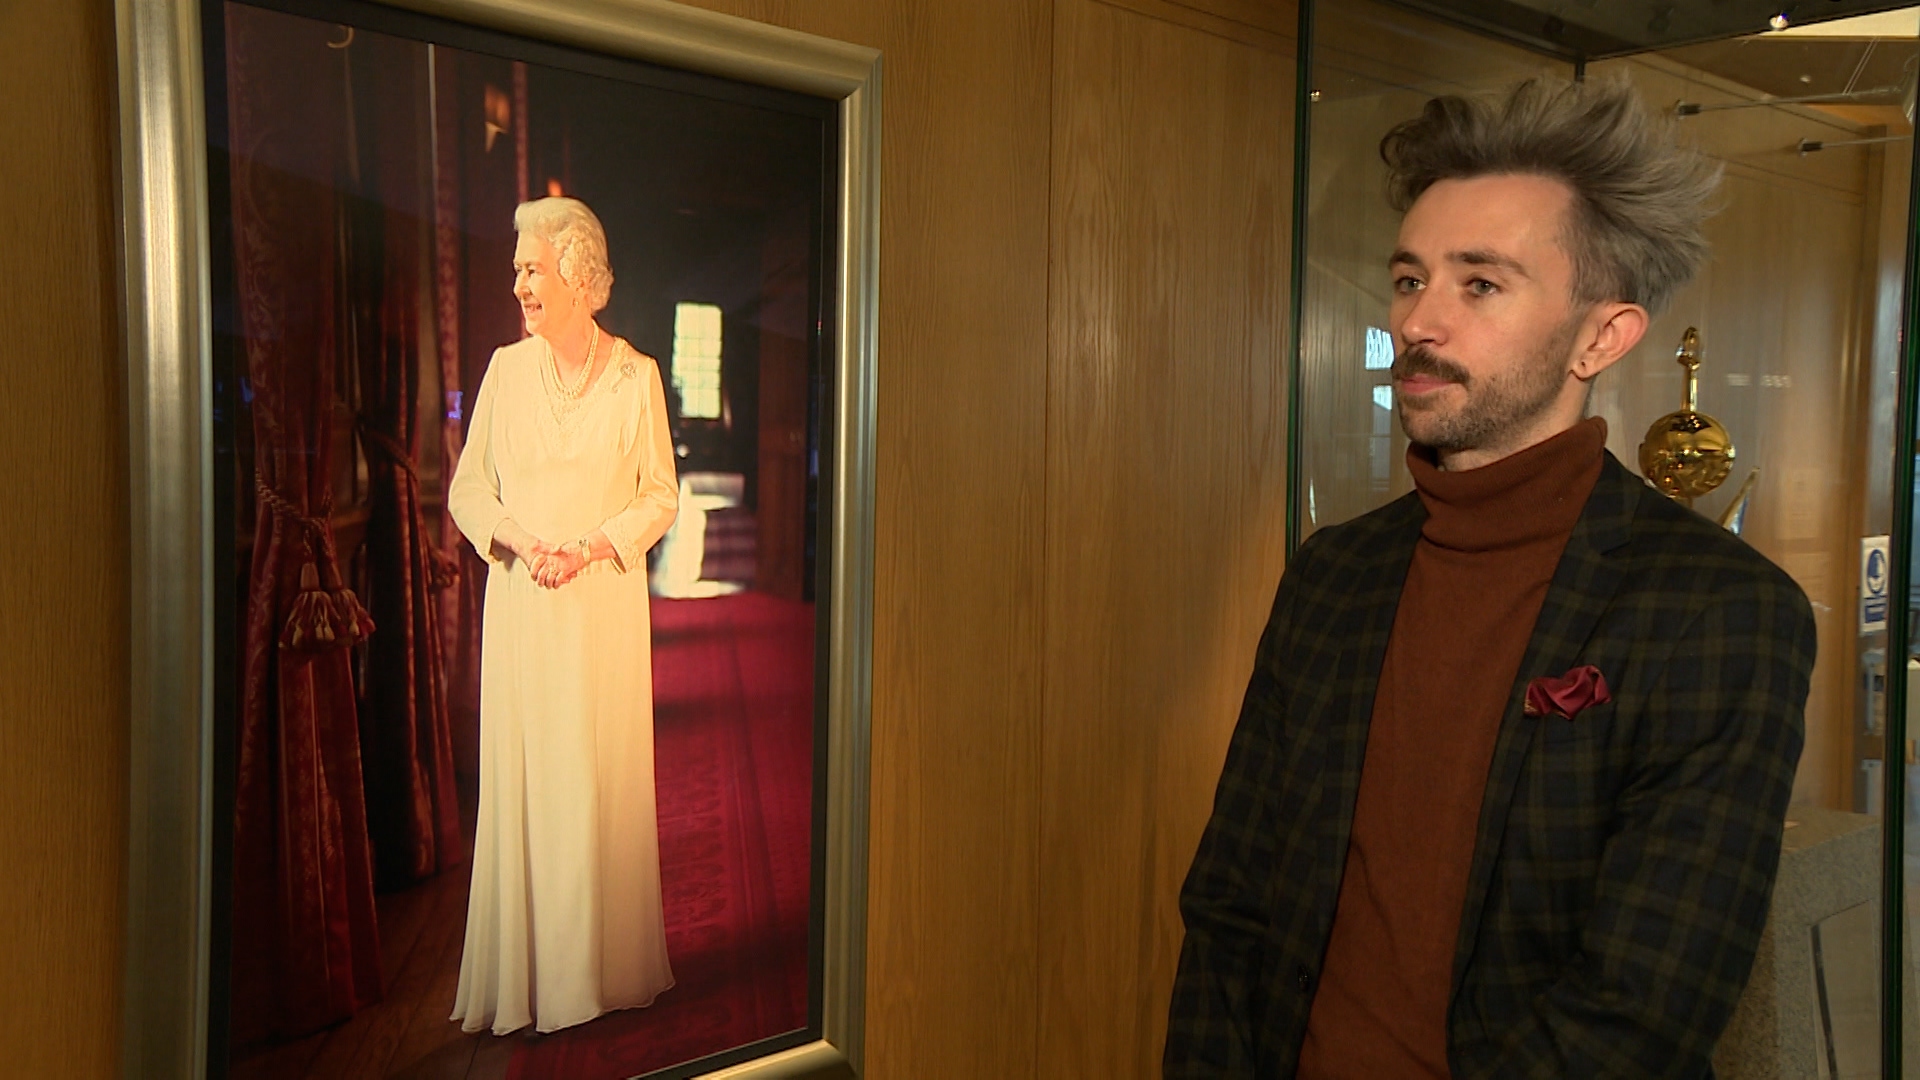 Shawn Murawski on taking the Queen's official portrait